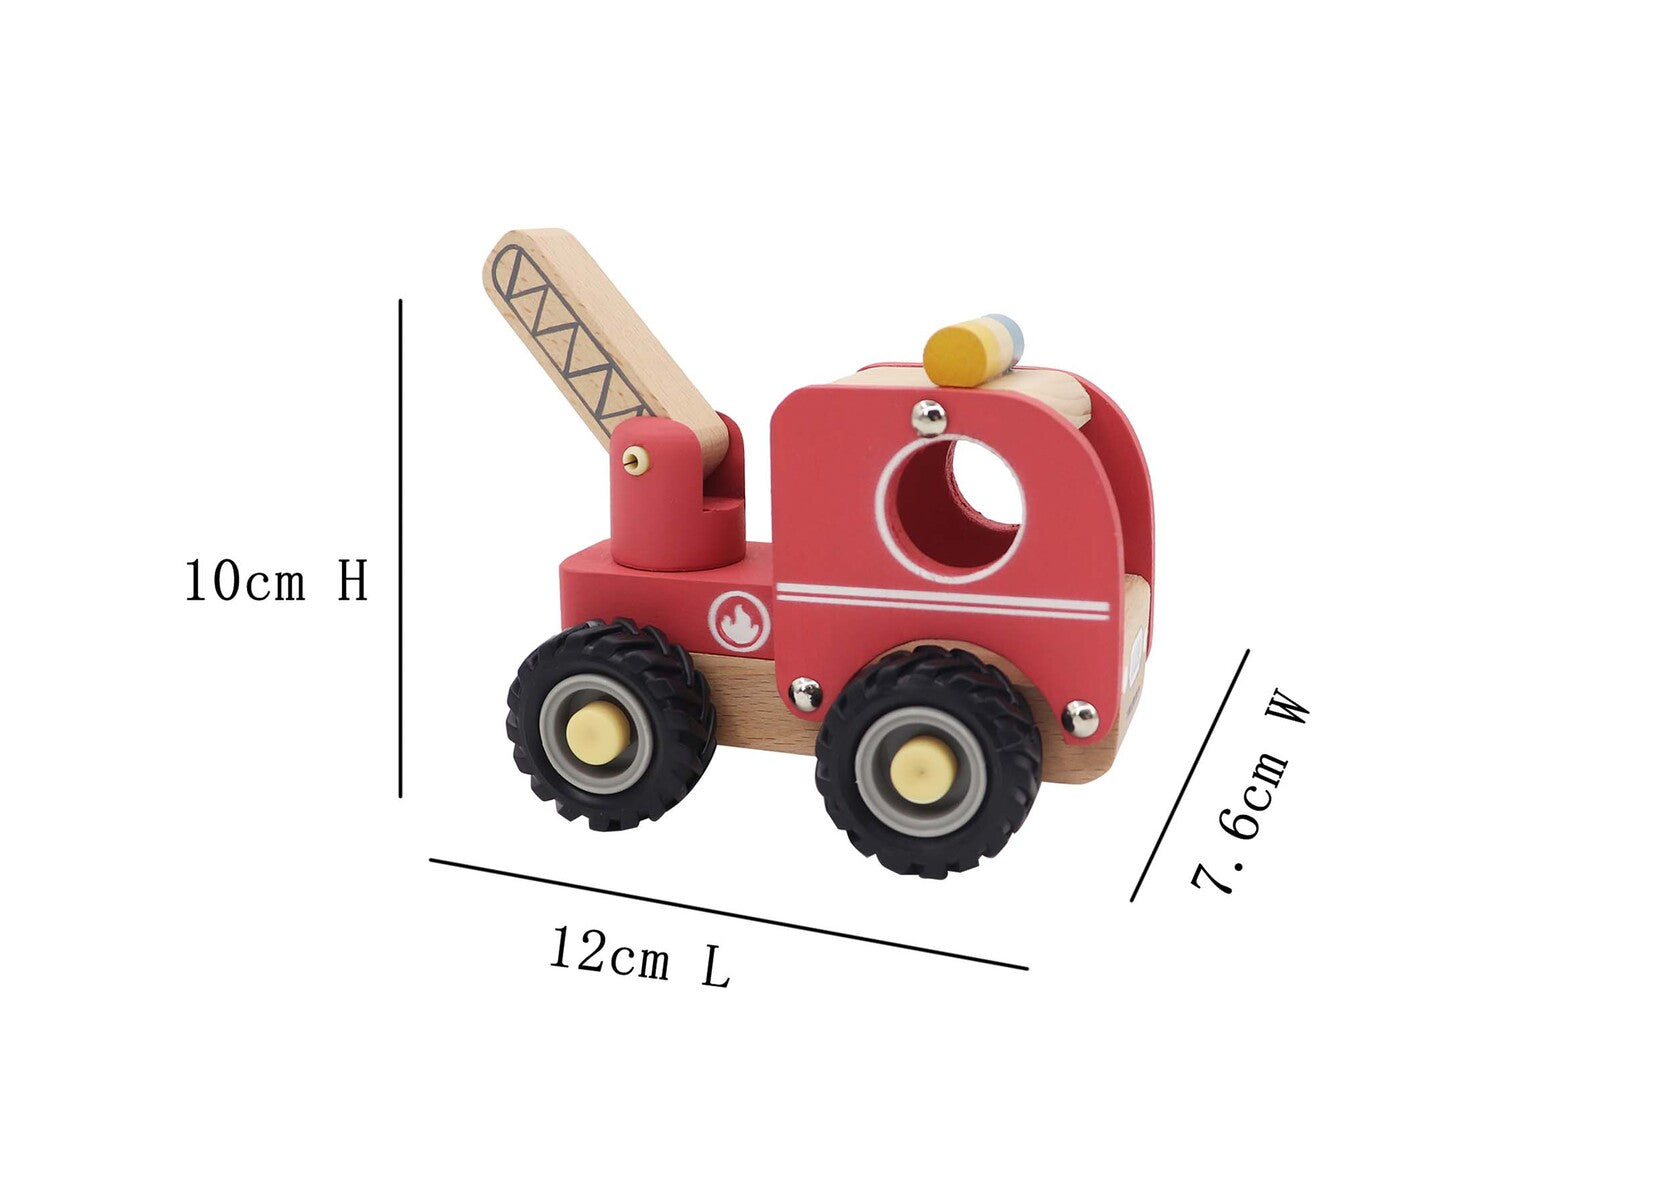 wooden toy fire engine - angus and dudley